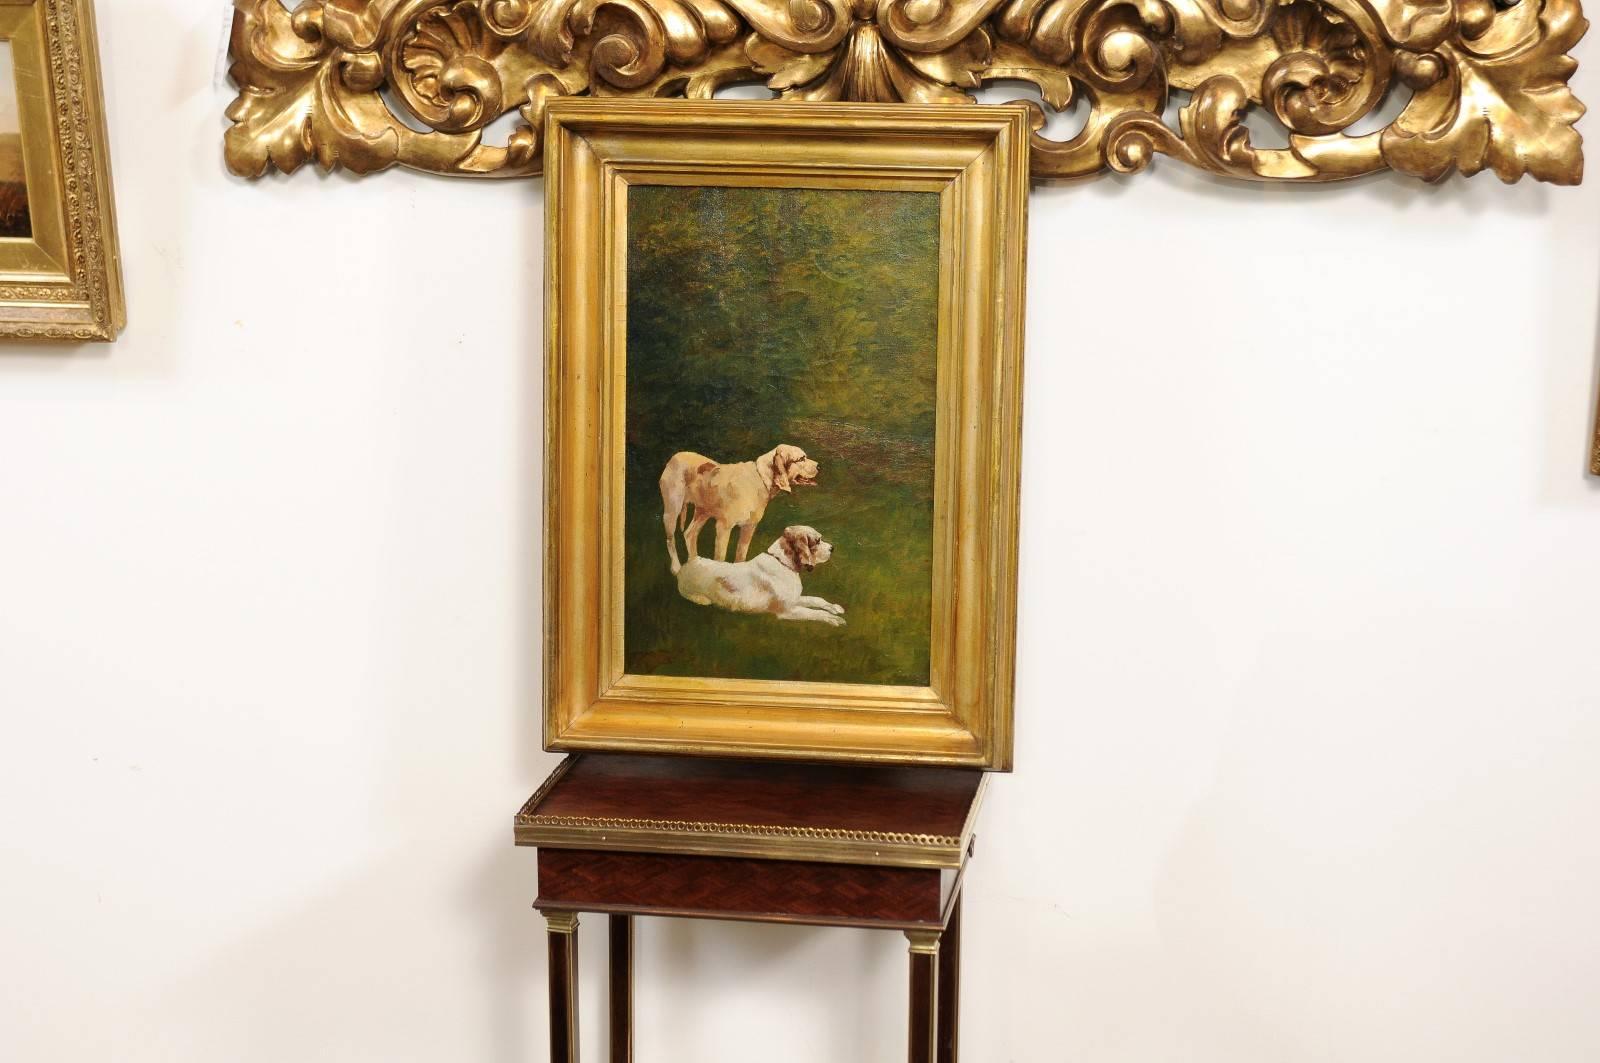 This French vertical format oil on canvas dog painting from the early part of the 20th century features a simple composition: two dogs with light coats in the center. One is standing while the other one is peacefully resting on the grass. The